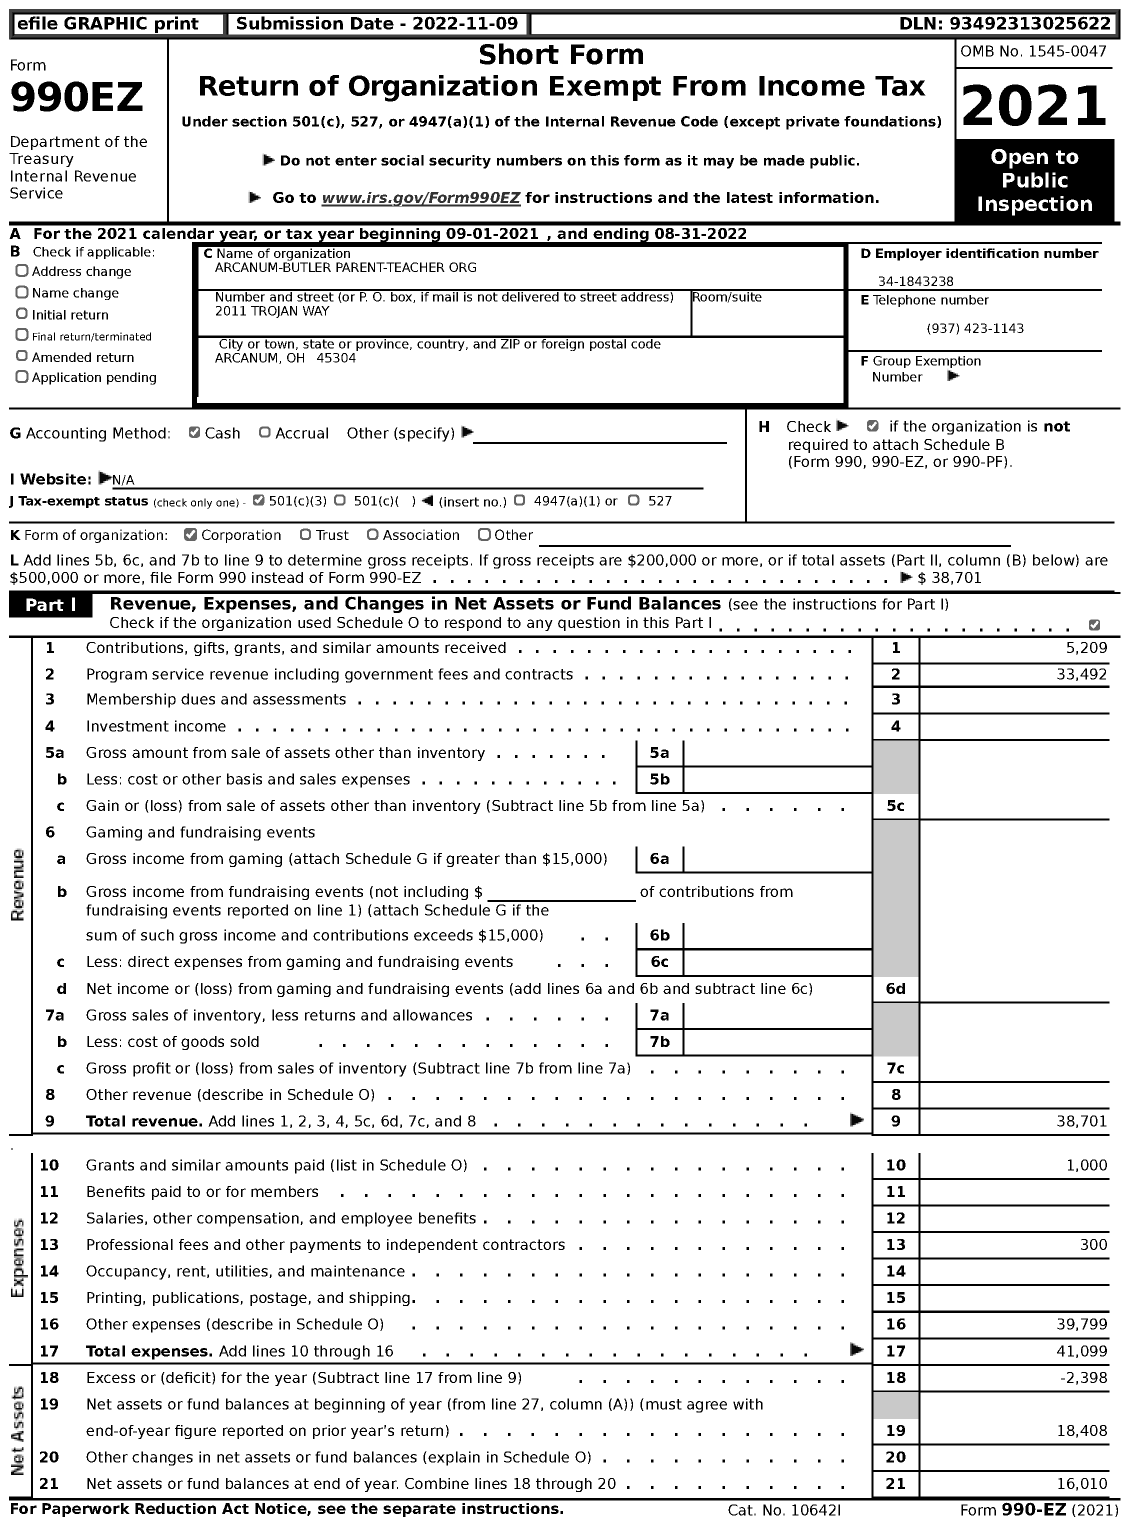 Image of first page of 2021 Form 990EZ for Arcanum-Butler Parent-Teacher Org